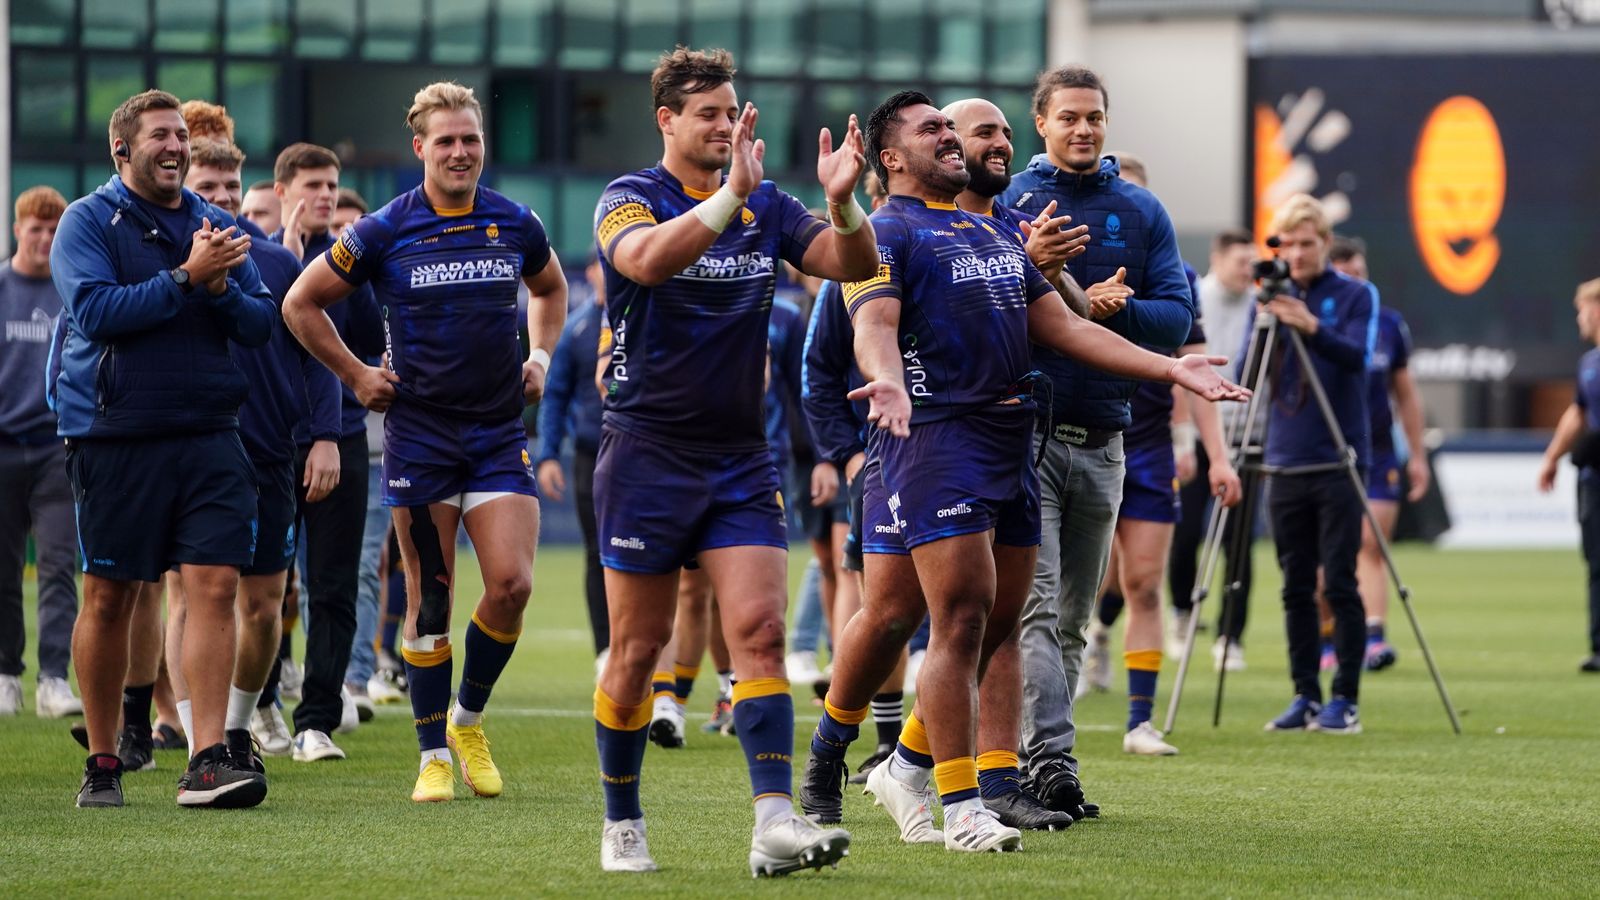 Gallagher Premiership: Worcester thrash Newcastle 39-5 | Warriors players voted on whether to play against Falcons